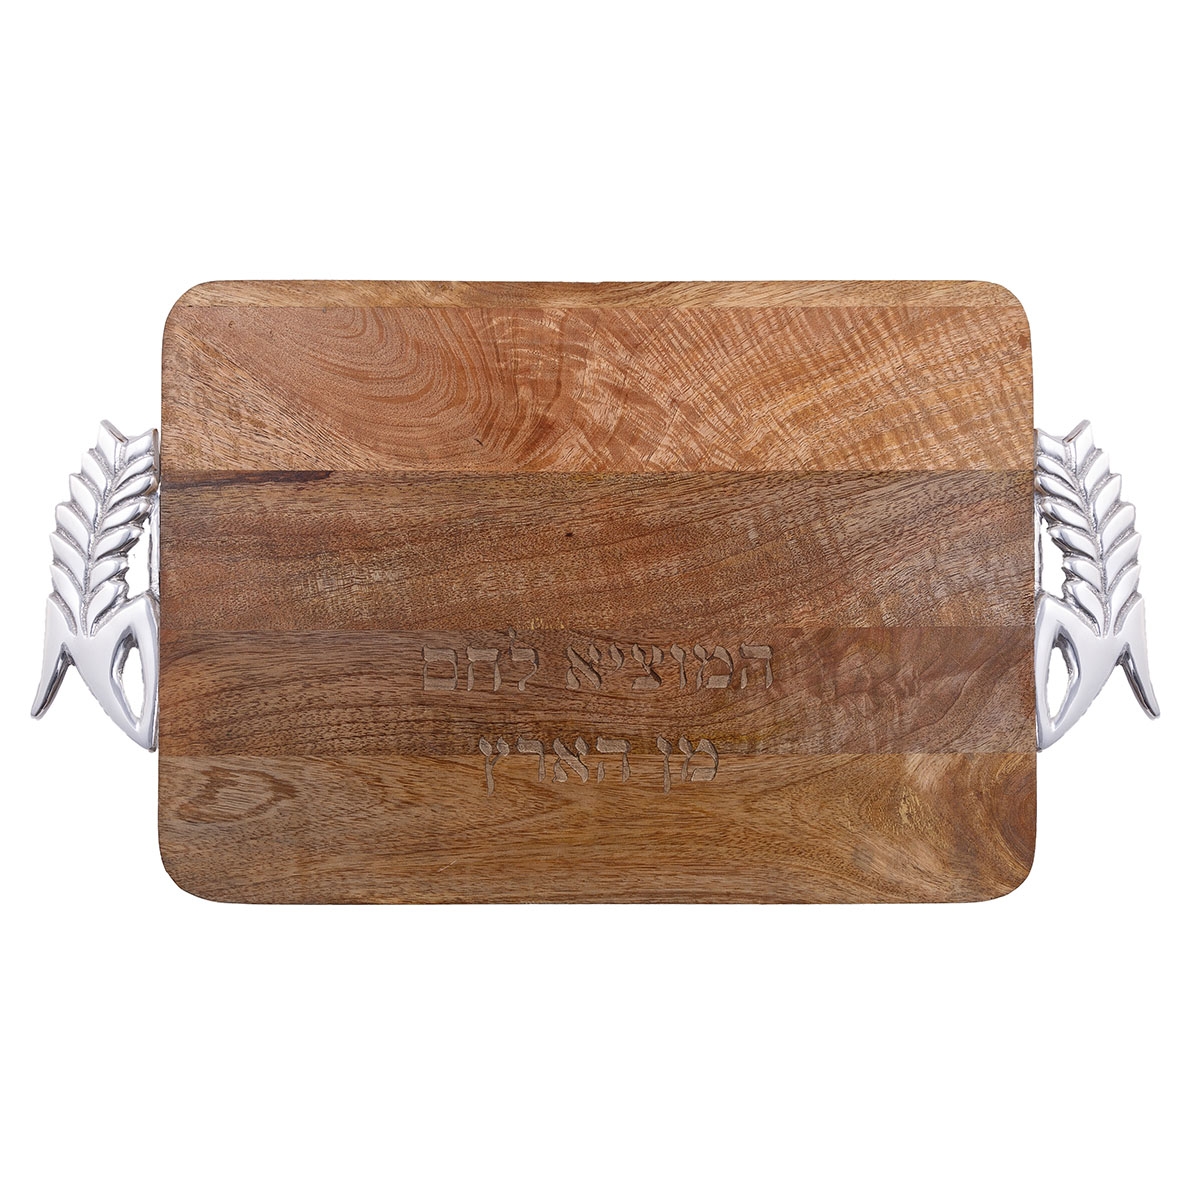 Yair Emanuel Wooden Challah Board with Blessing - Wheat - 1